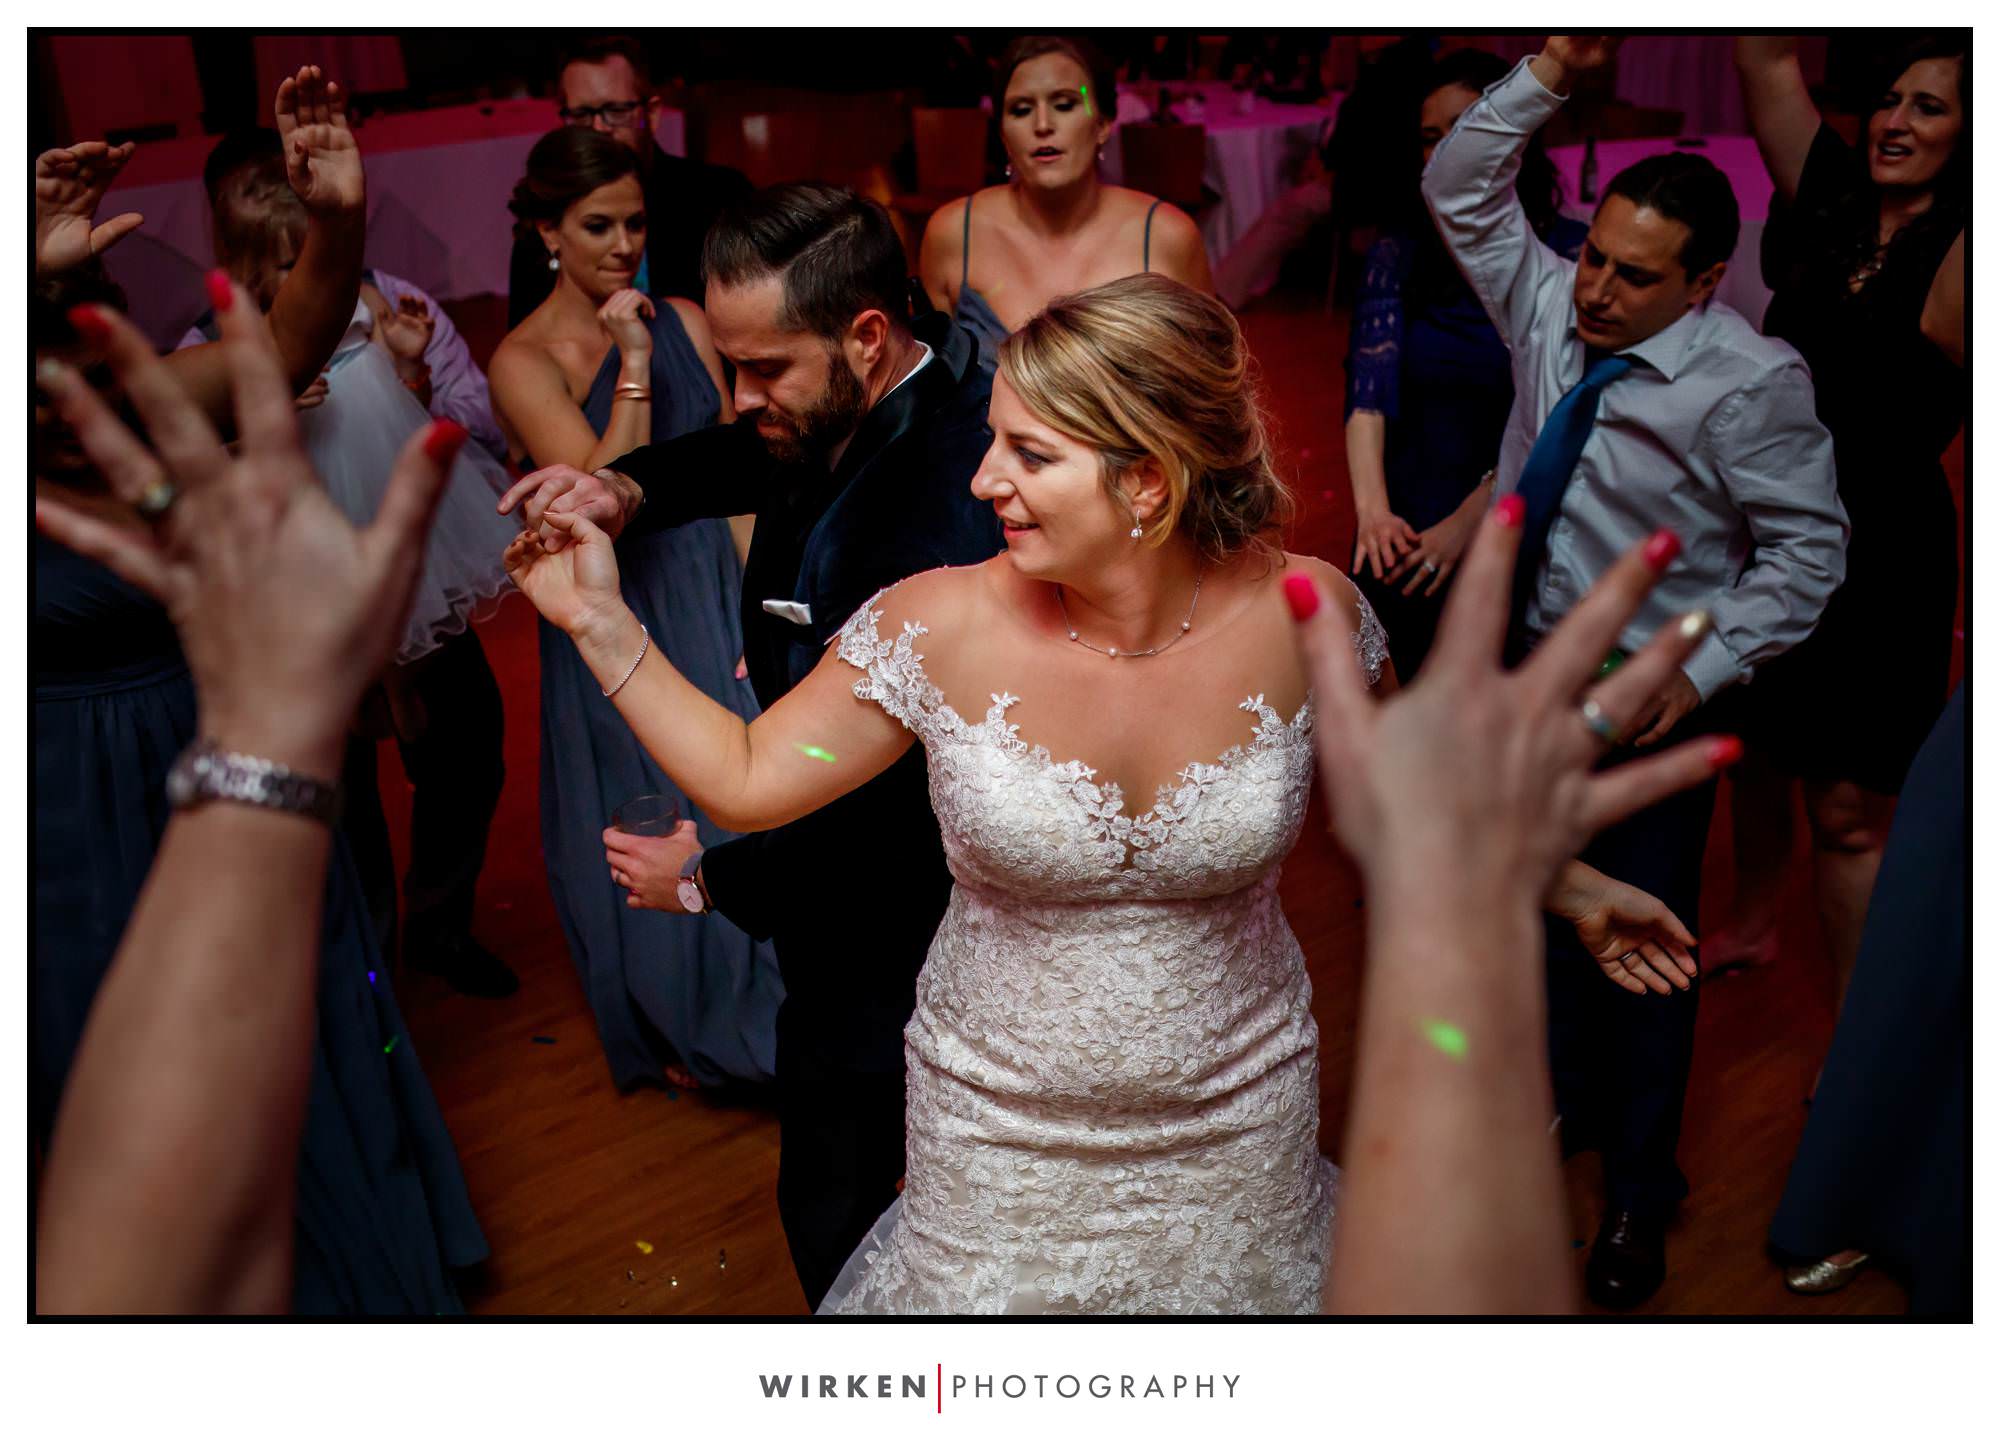 Leah and Ryan dance at their Gallery Center wedding reception.